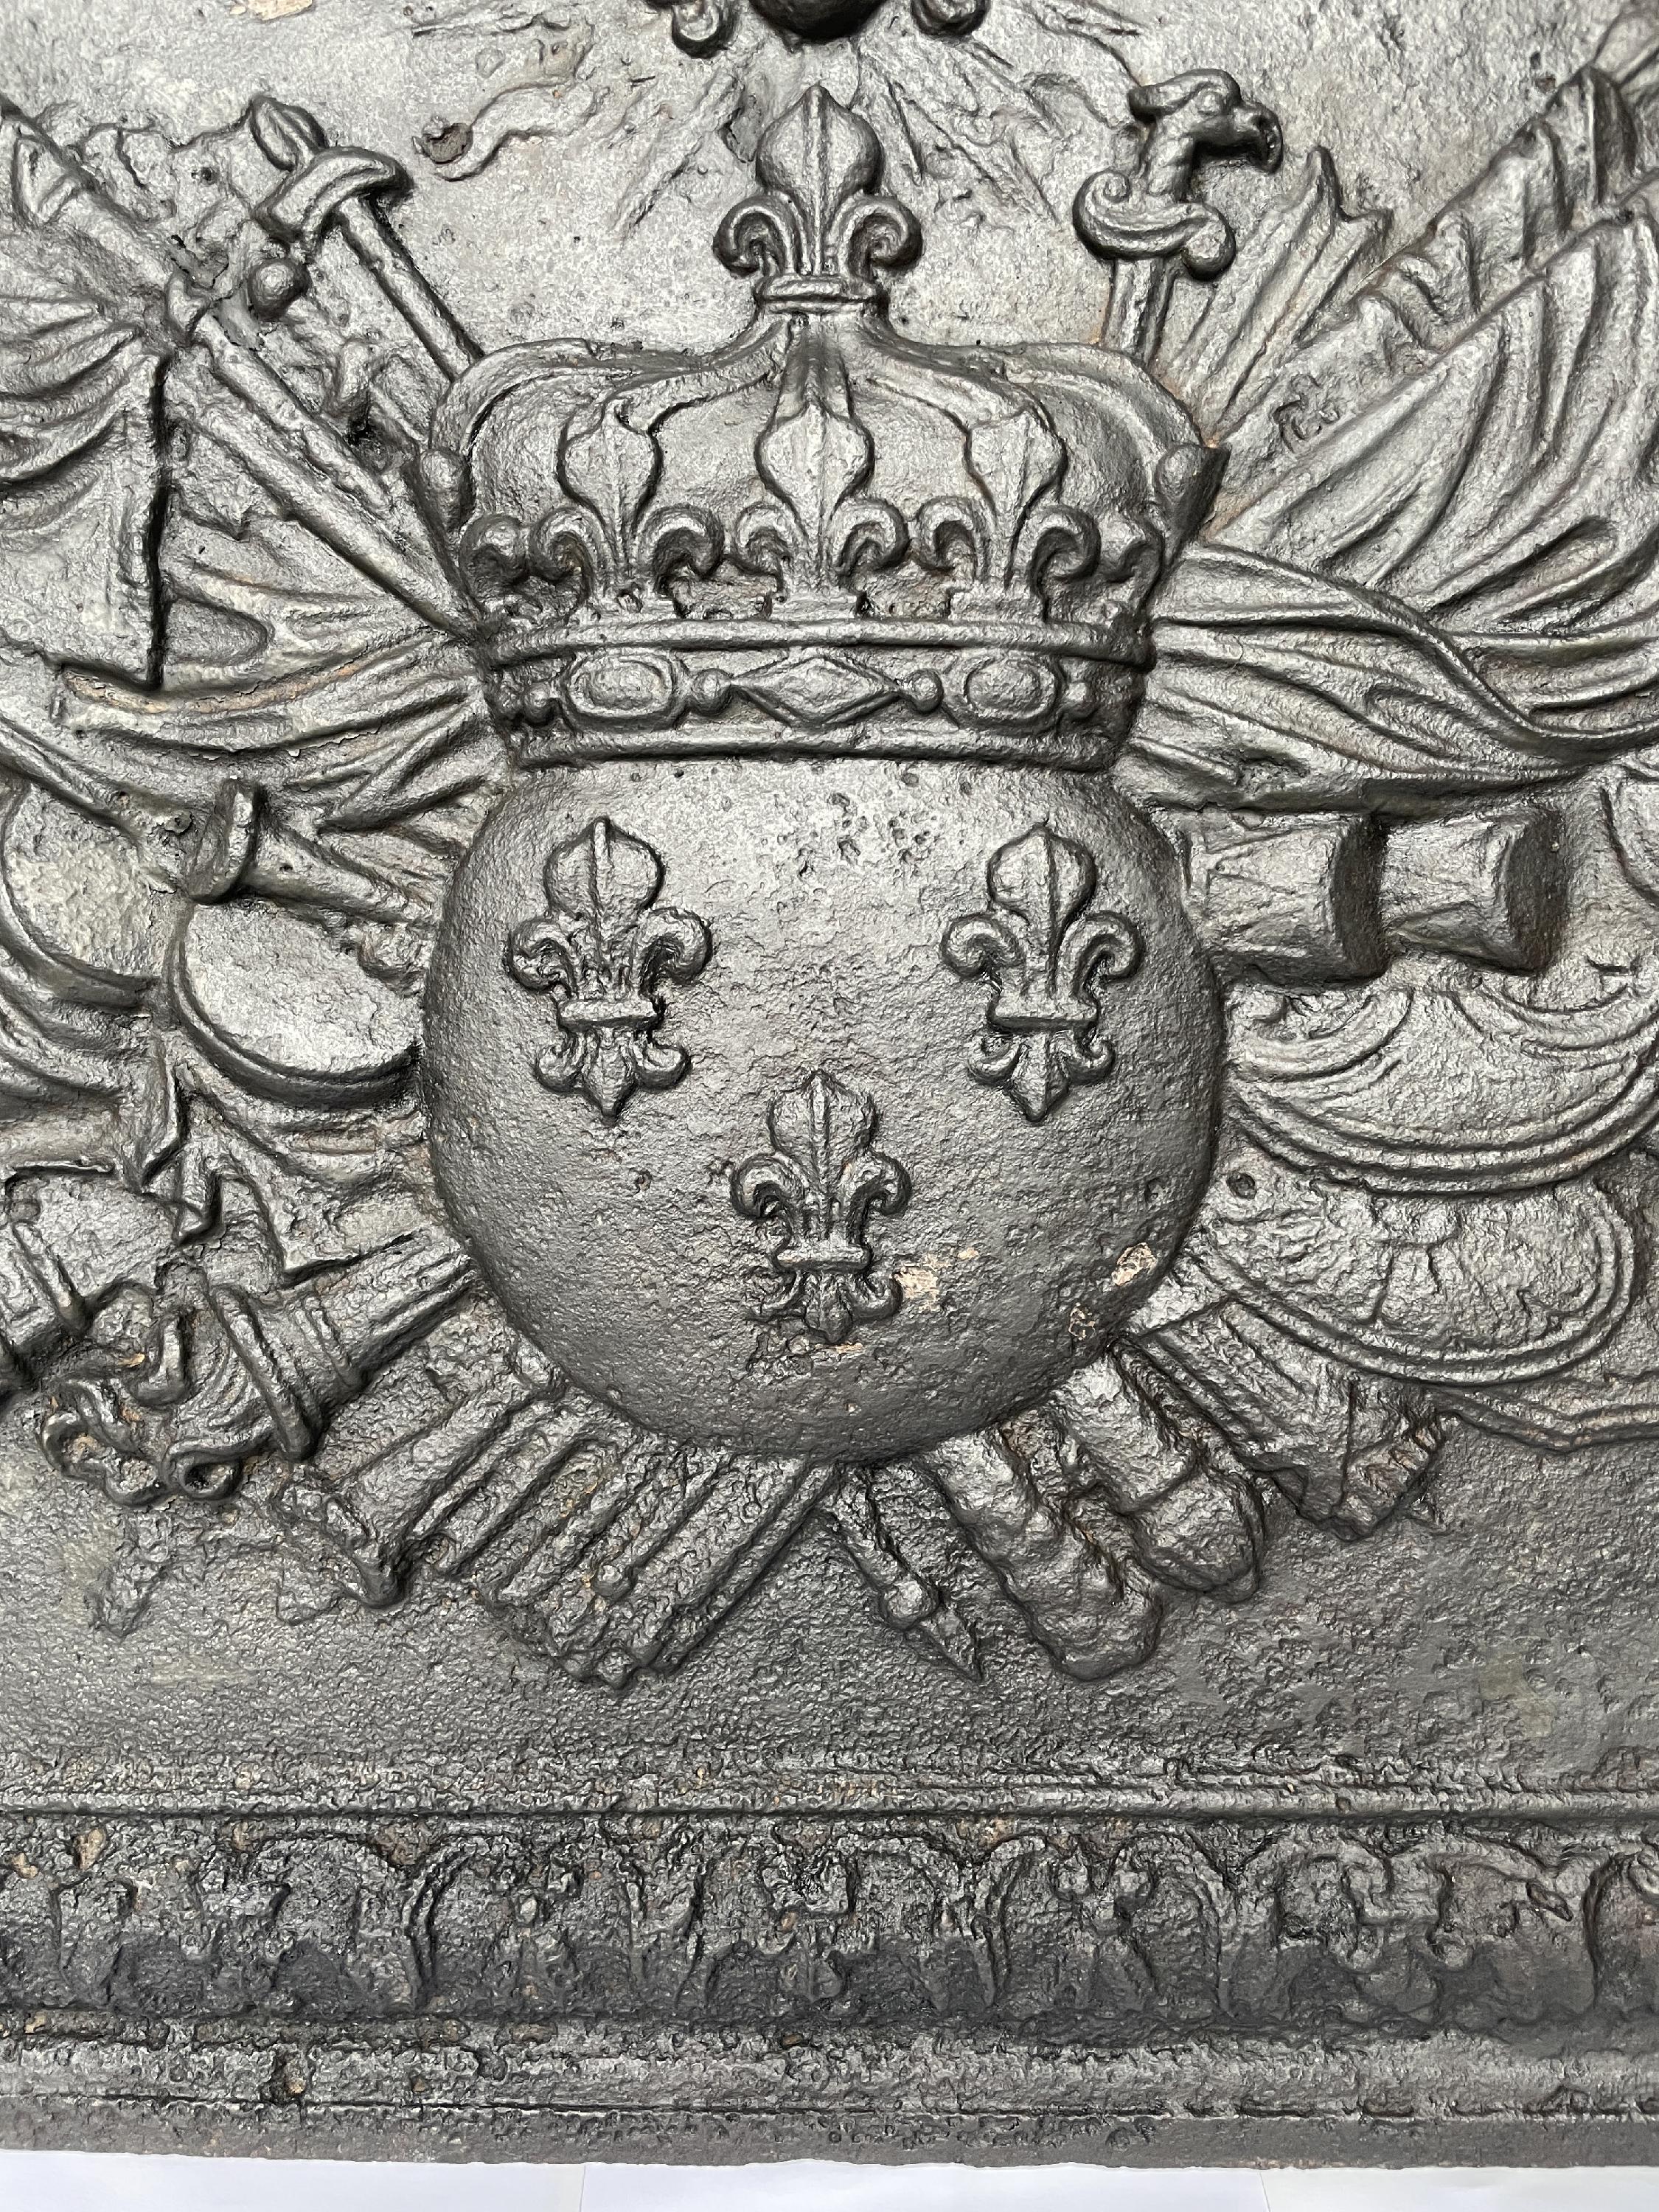 This exceptional fireback was cast in the 17th century.
It is adorned by the France's coat of arms crowned with the Royal crown put in front of flags and war weapons. We can also see the mascarons depicting the Sun King and his motto 